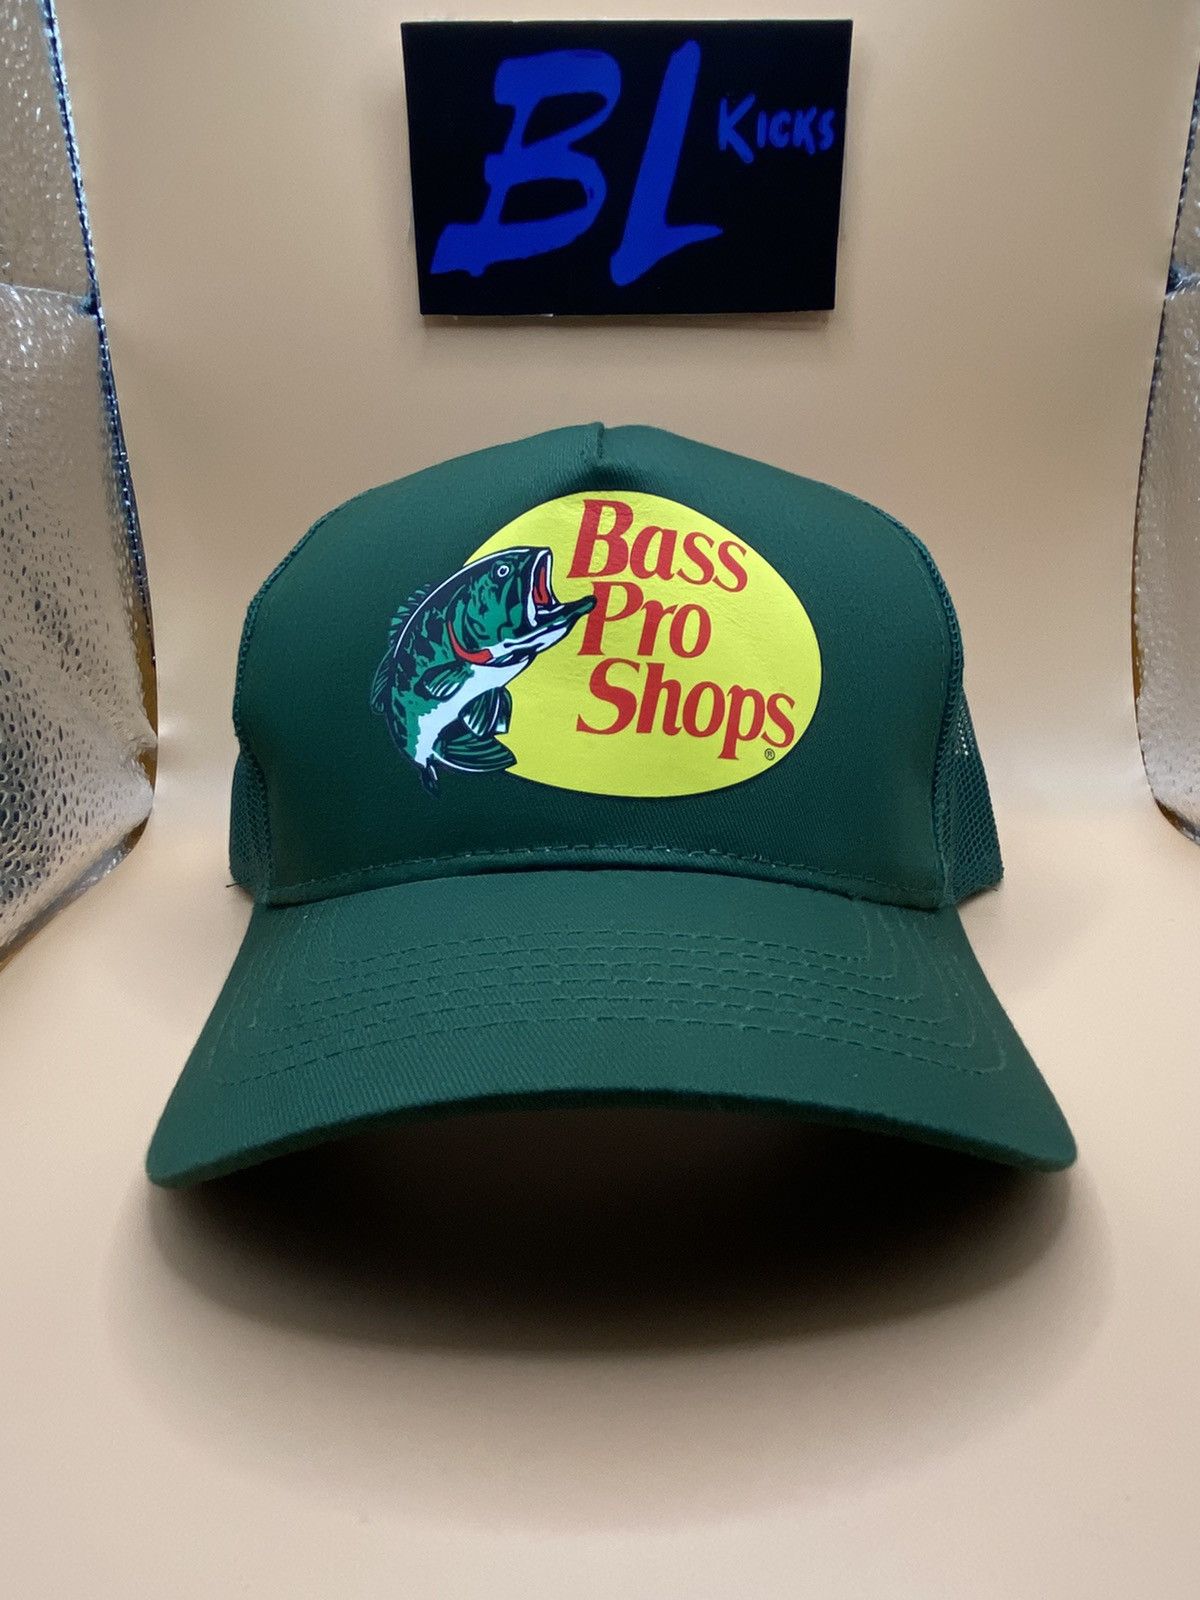 Bass Pro Shops Twotone Green Trucker Hat • Tag Bass Pro Shops Kondisi:  (9/10) excellent condition, best colorway basa pro hat, RARE💚